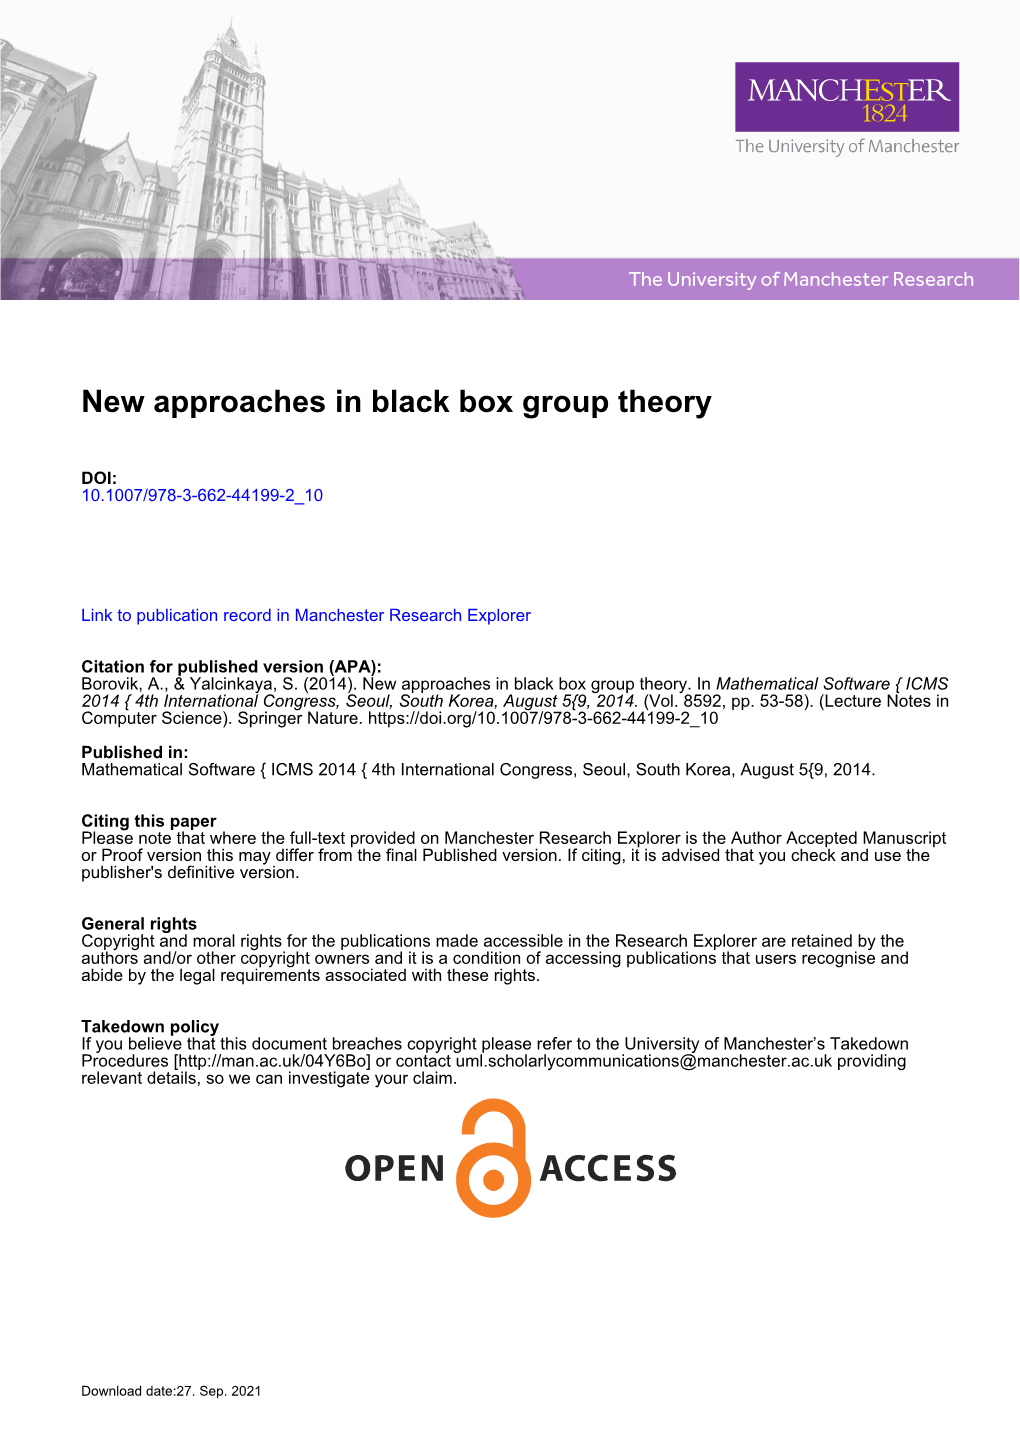 New Approaches in Black Box Group Theory